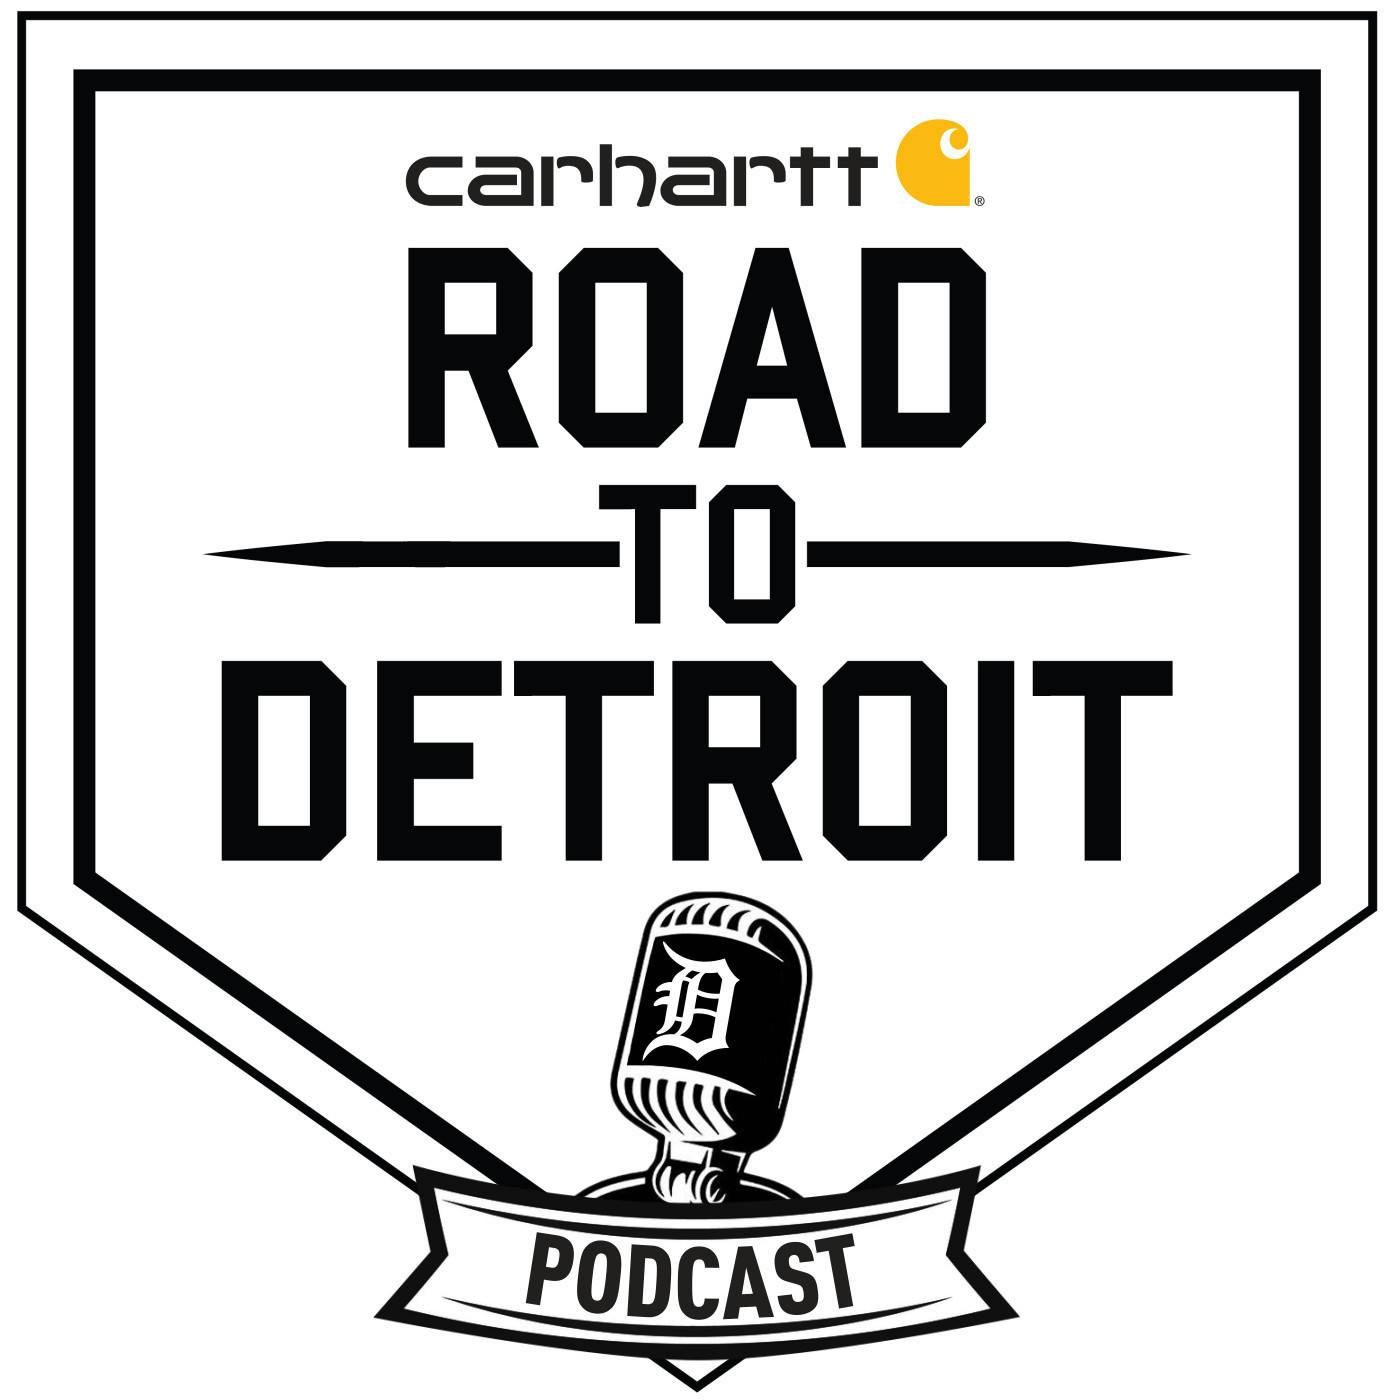 Road To Detroit presented by Carhartt Episode 5: Dingler & Draft